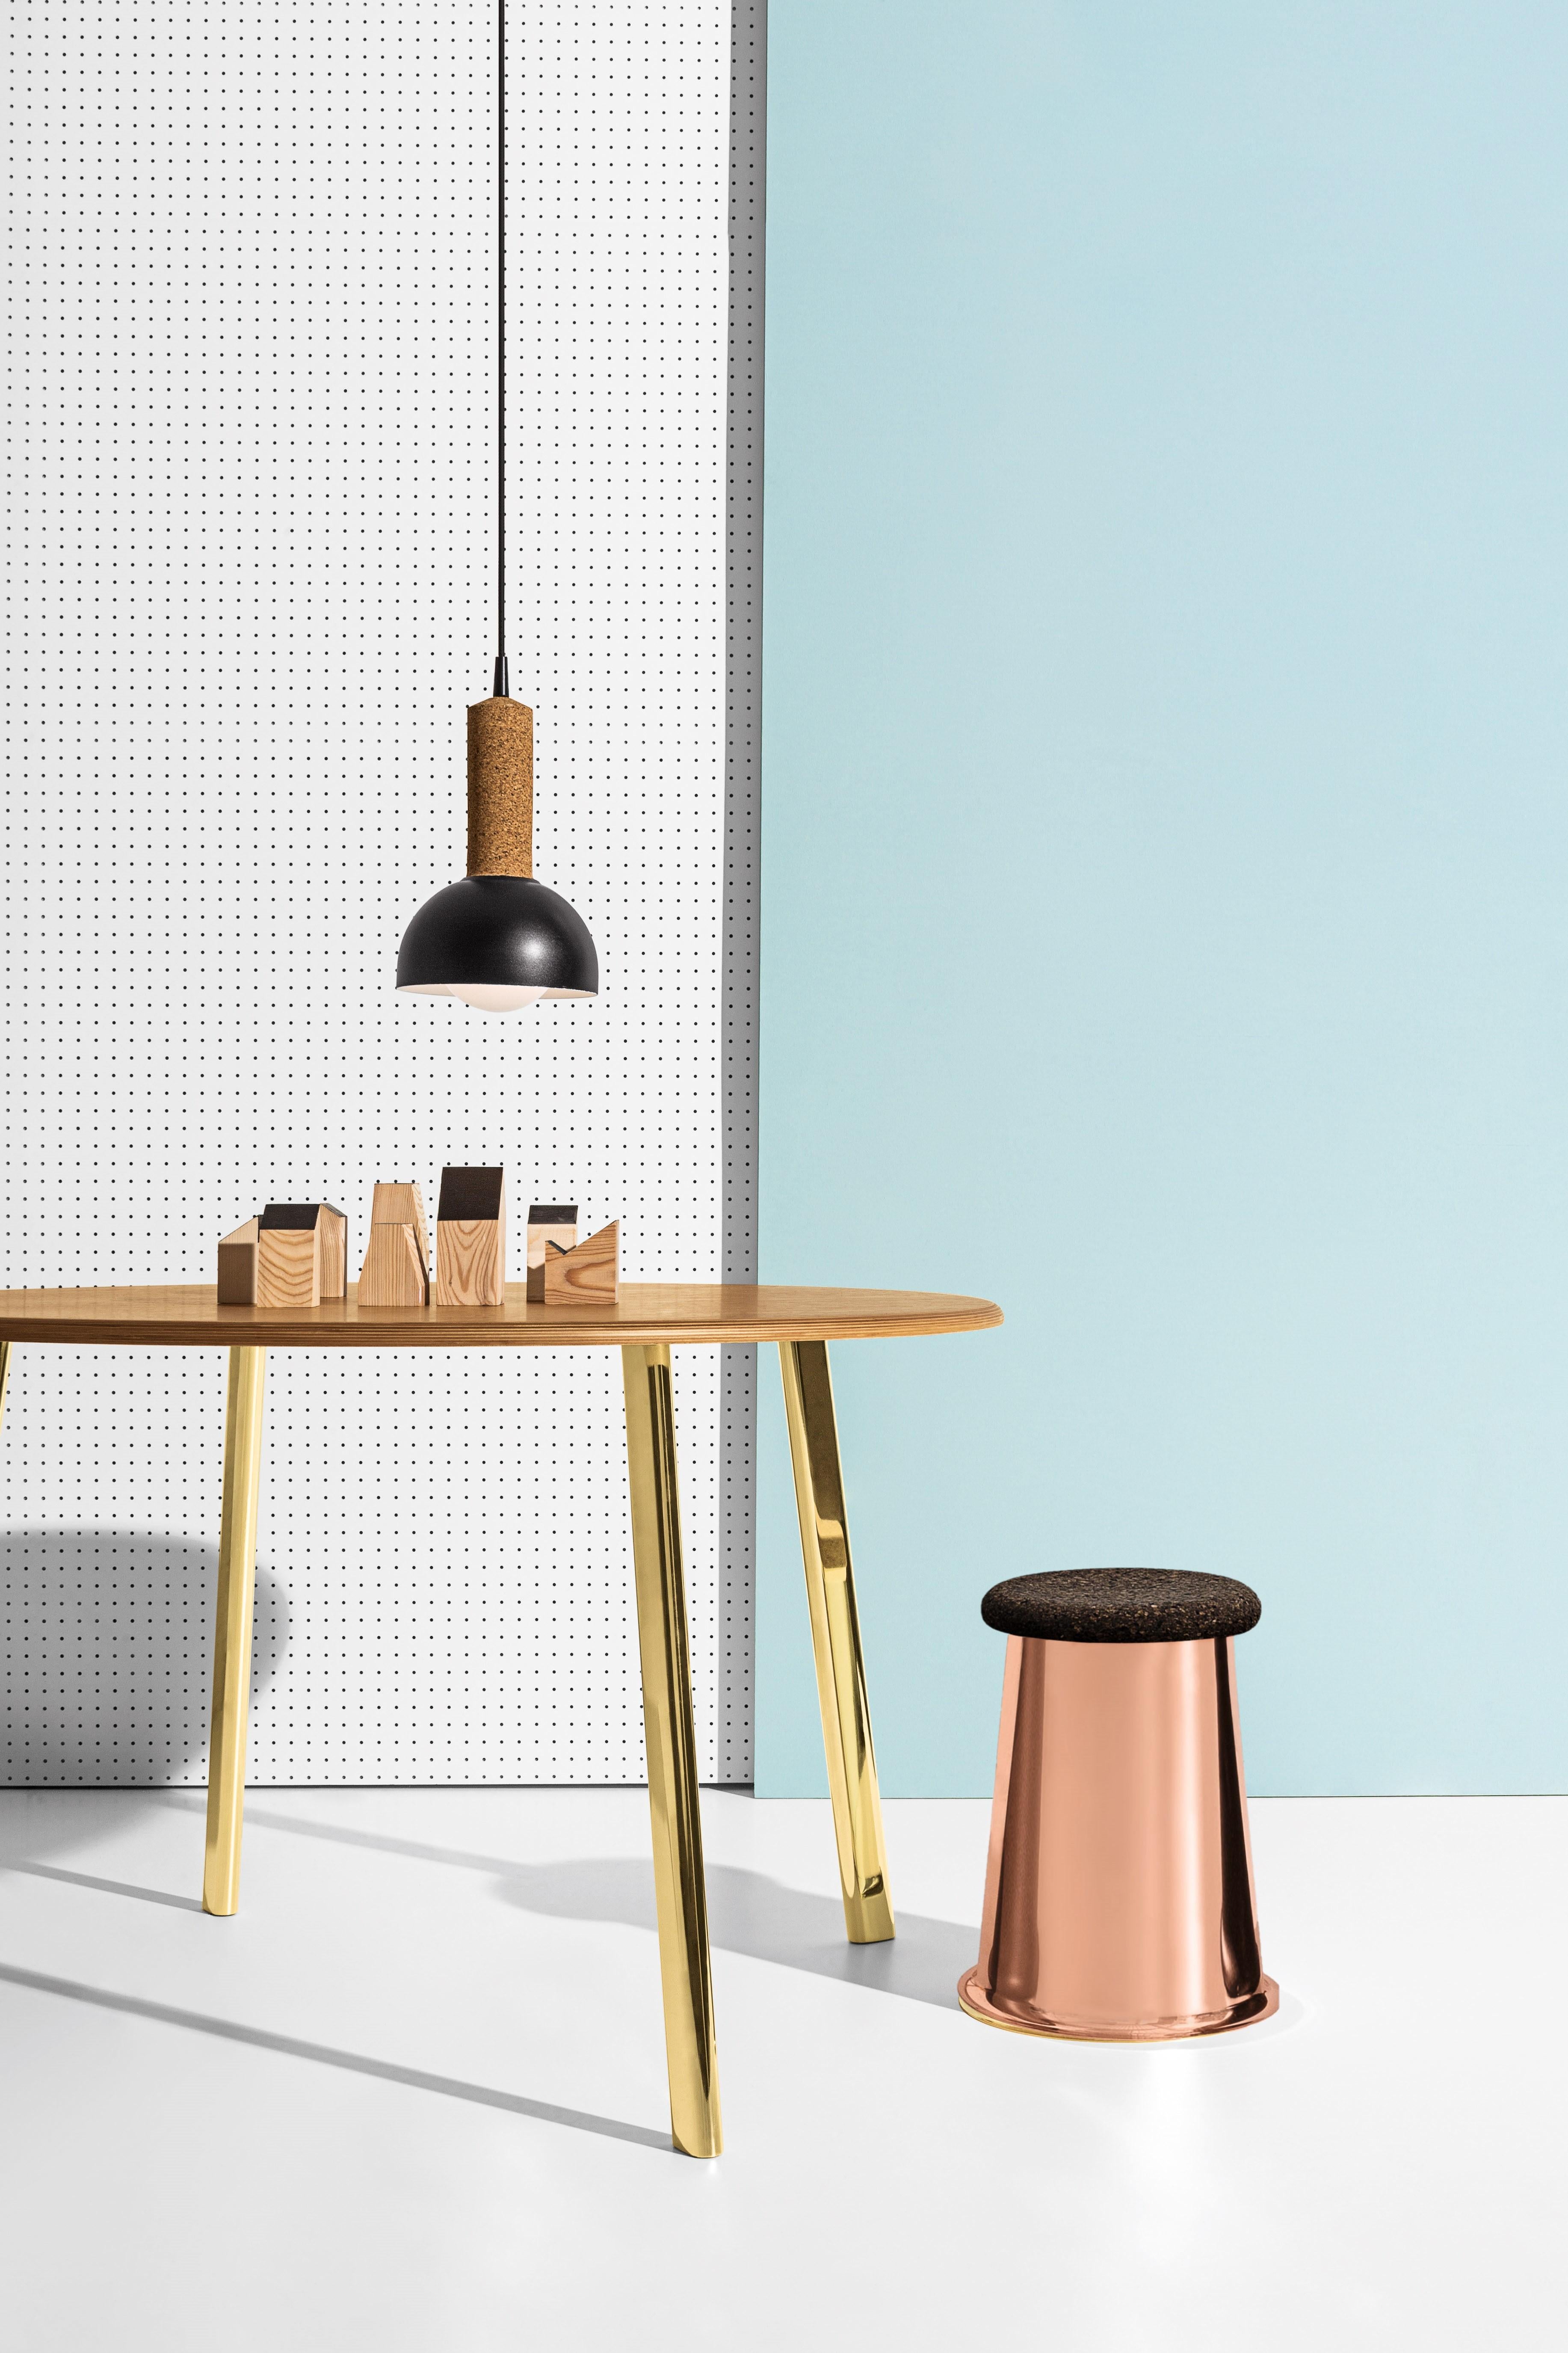 Italian Siit Stool, Polished Copper Base and Dark Cork Seat by Discipline Lab